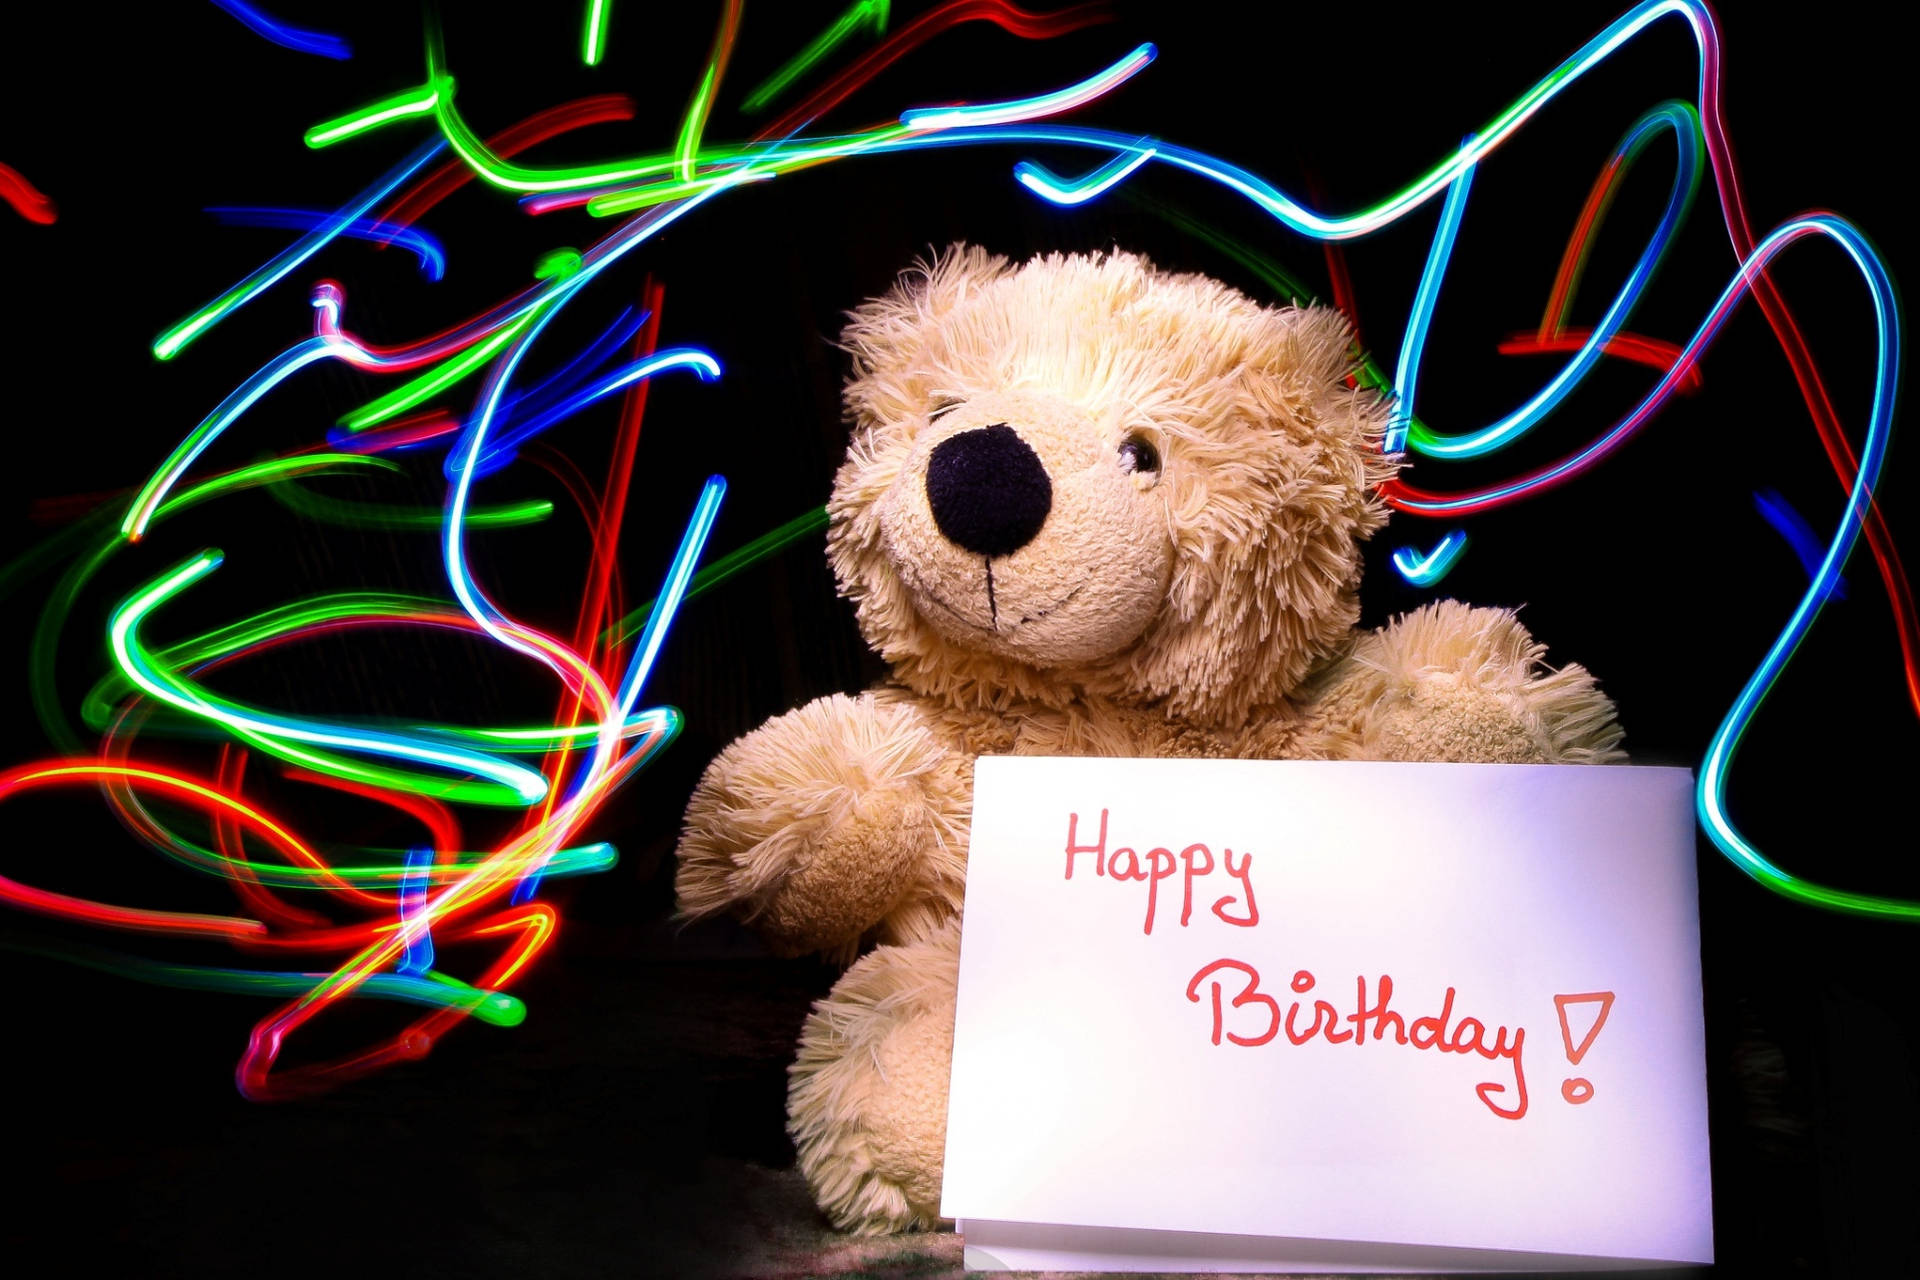 Image Caption: "Celebrate with Me - It's My Birthday Teddy Bear" Wallpaper